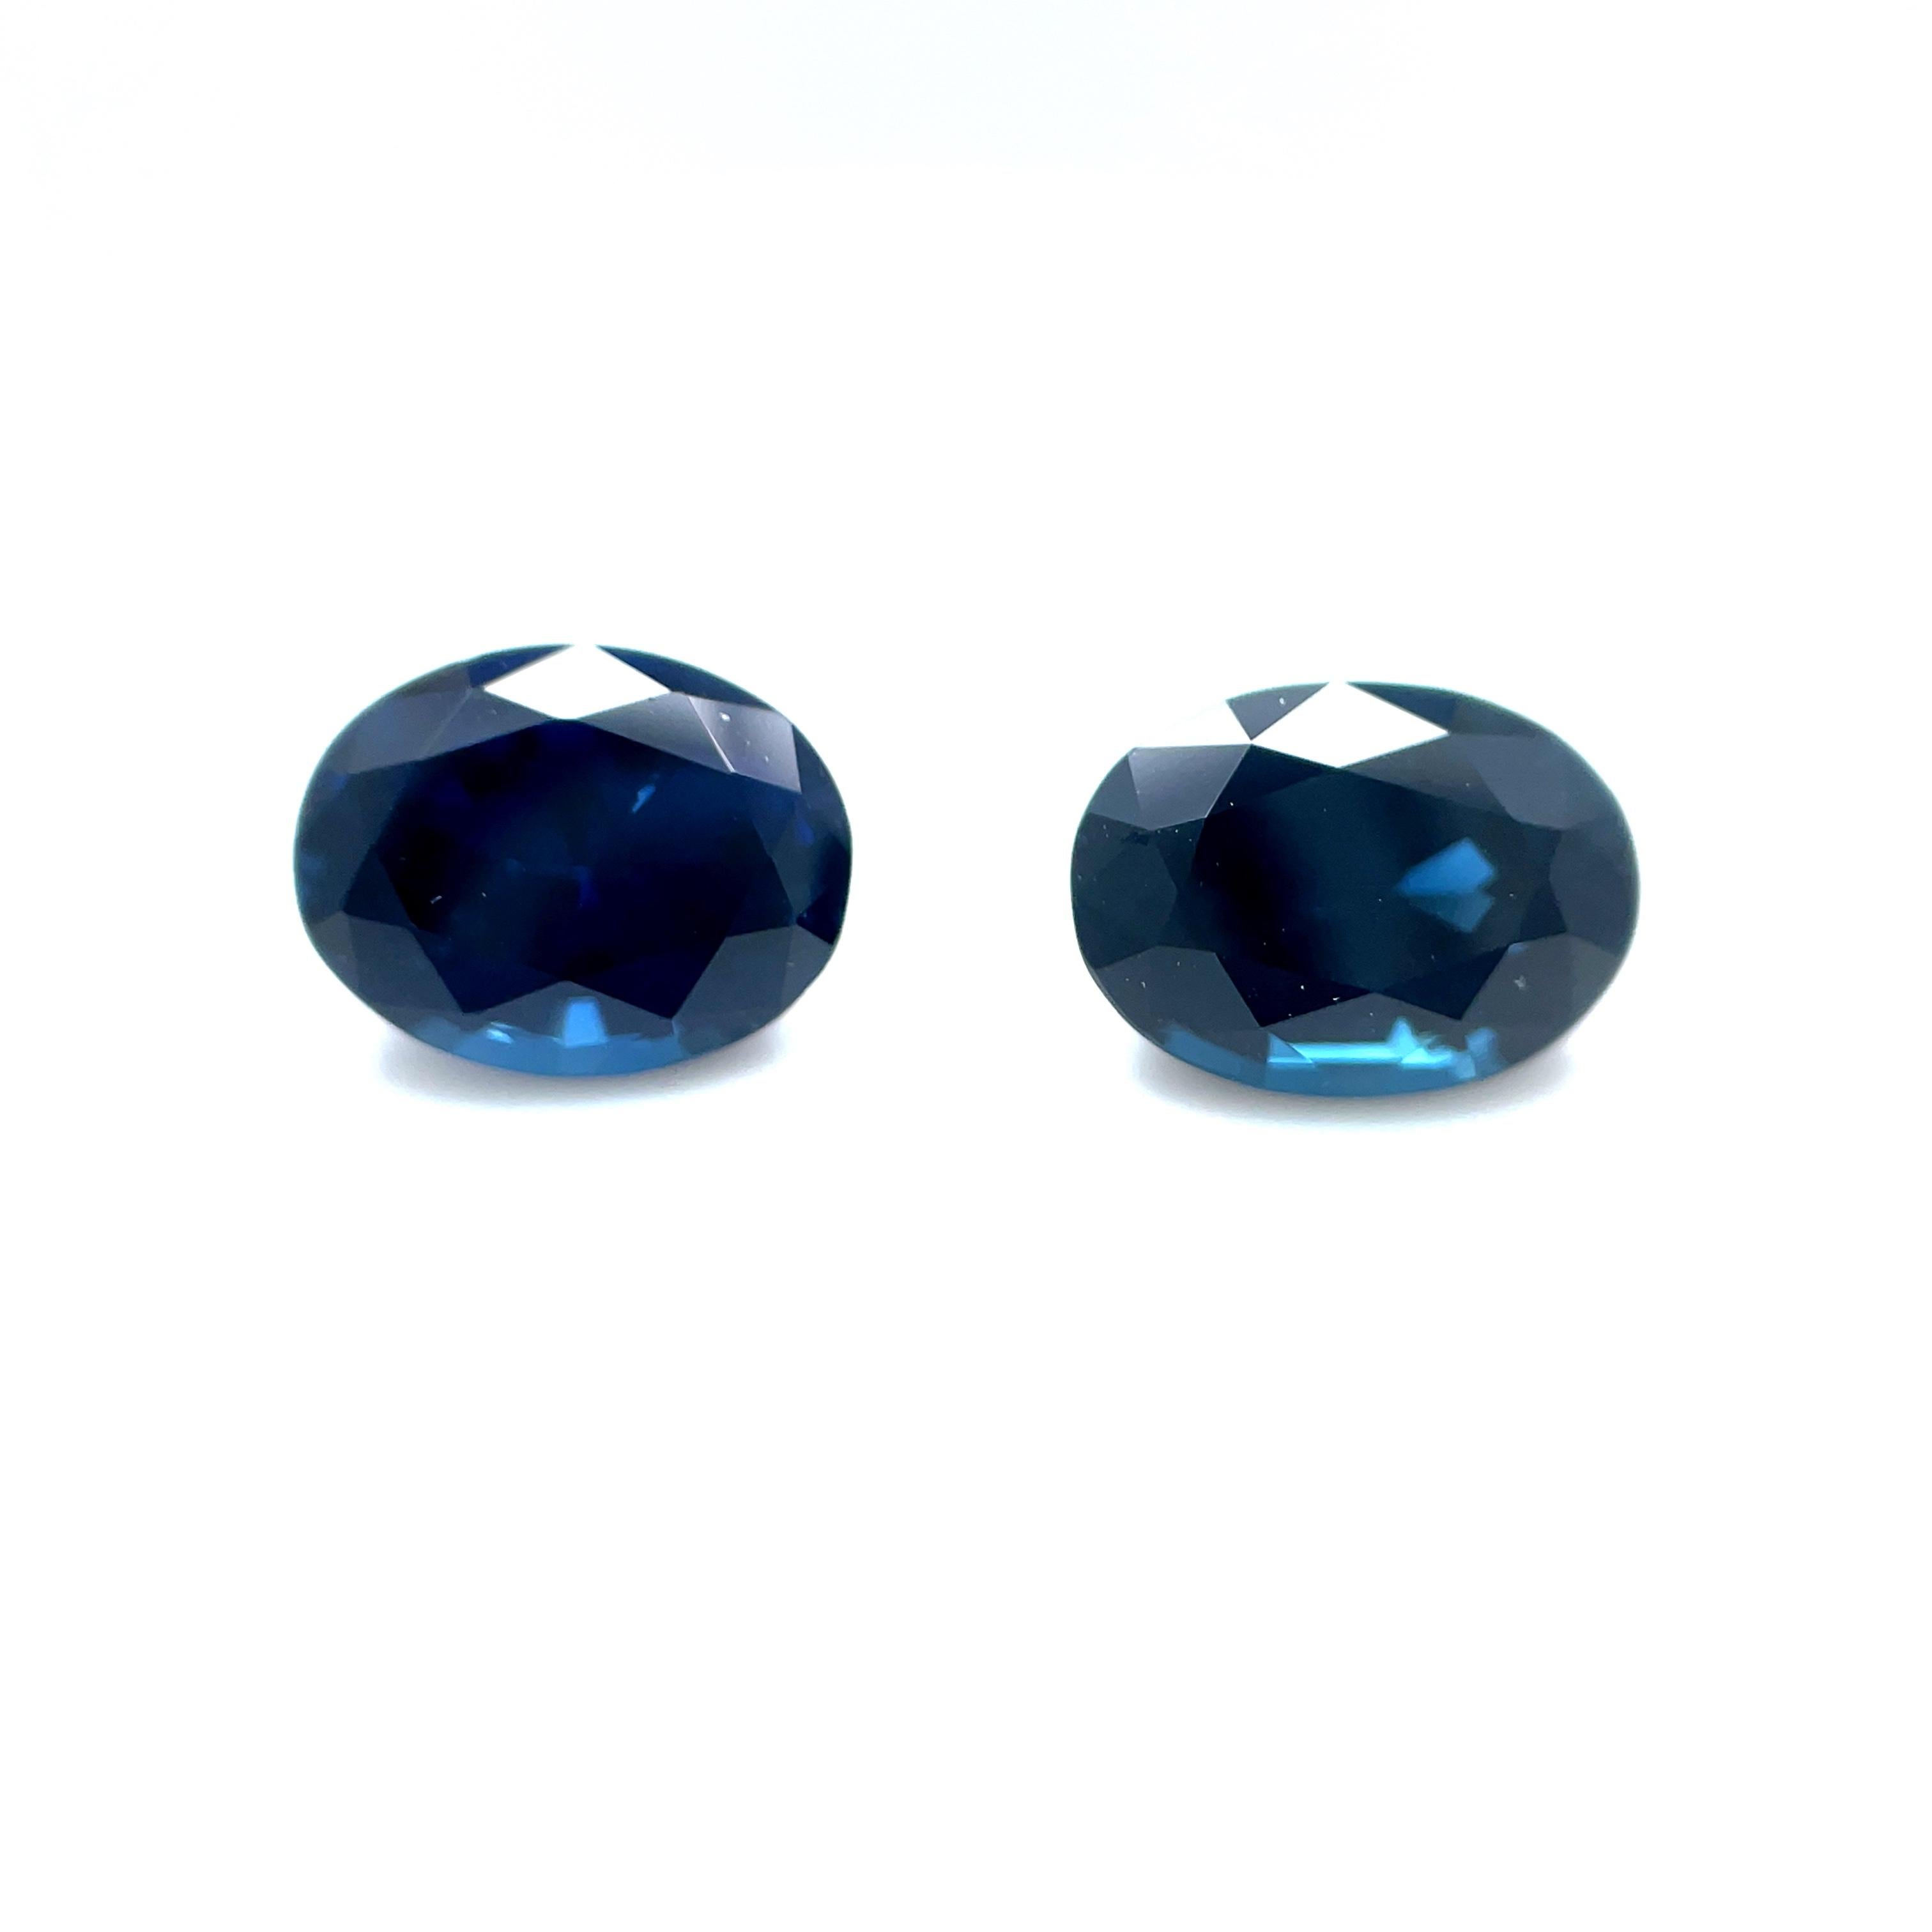 Royal blue sapphire earrings, what could be more regal? This pair of richly colored blue sapphires weighs 3.82 carats, are very clean, and have beautiful color! The classic oval shape lends itself to endless design possibilities. With such sizeable